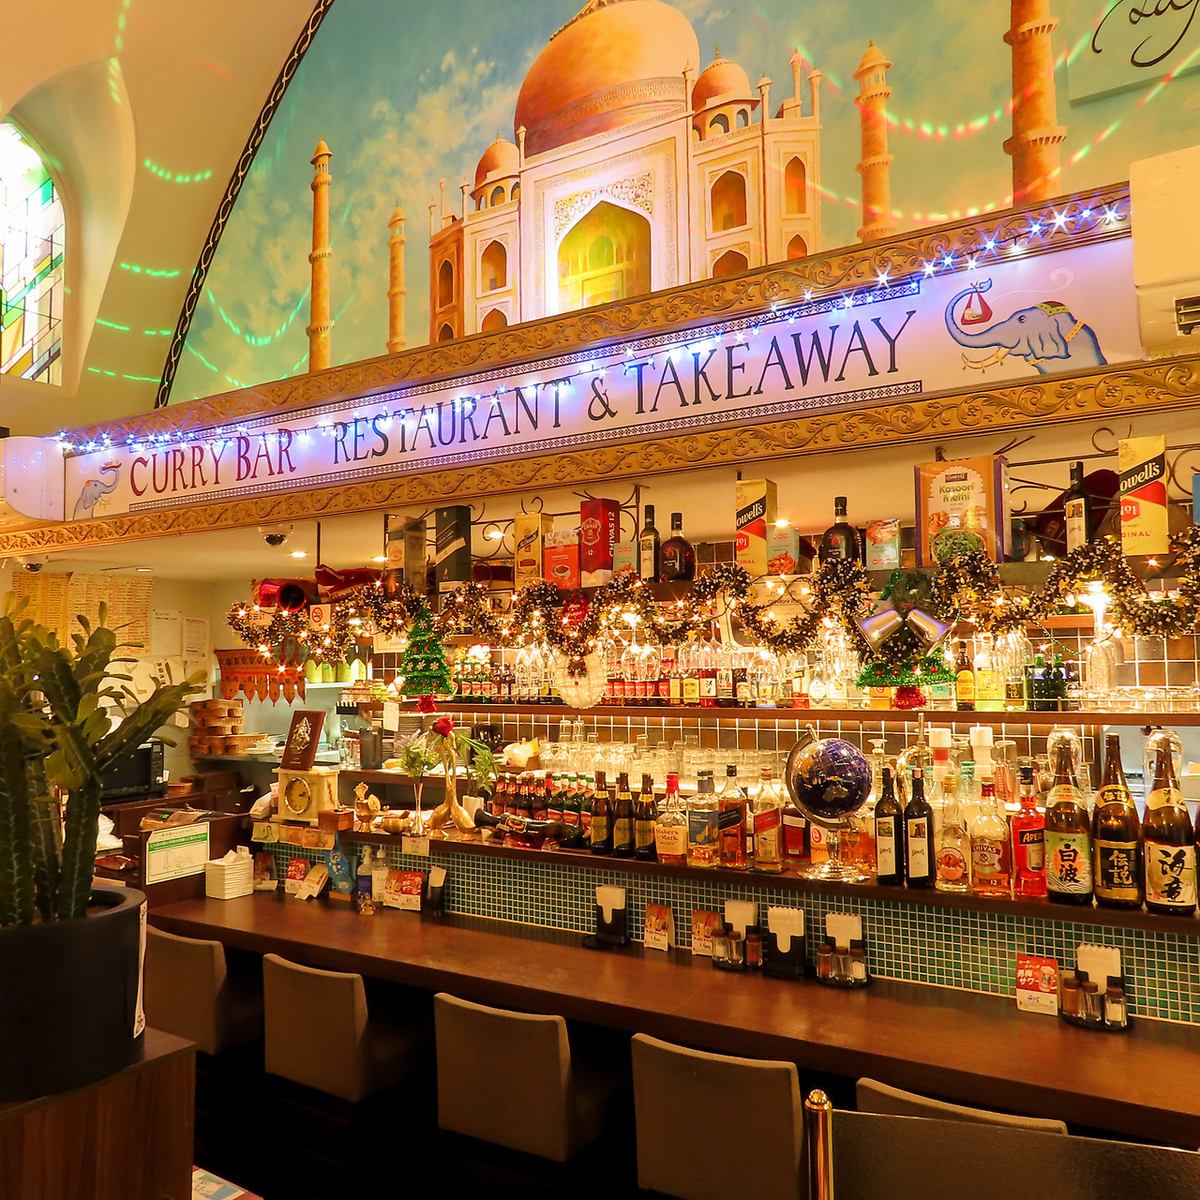 You won't even think it's a curry shop!The curry inside the stylish restaurant is exquisite!